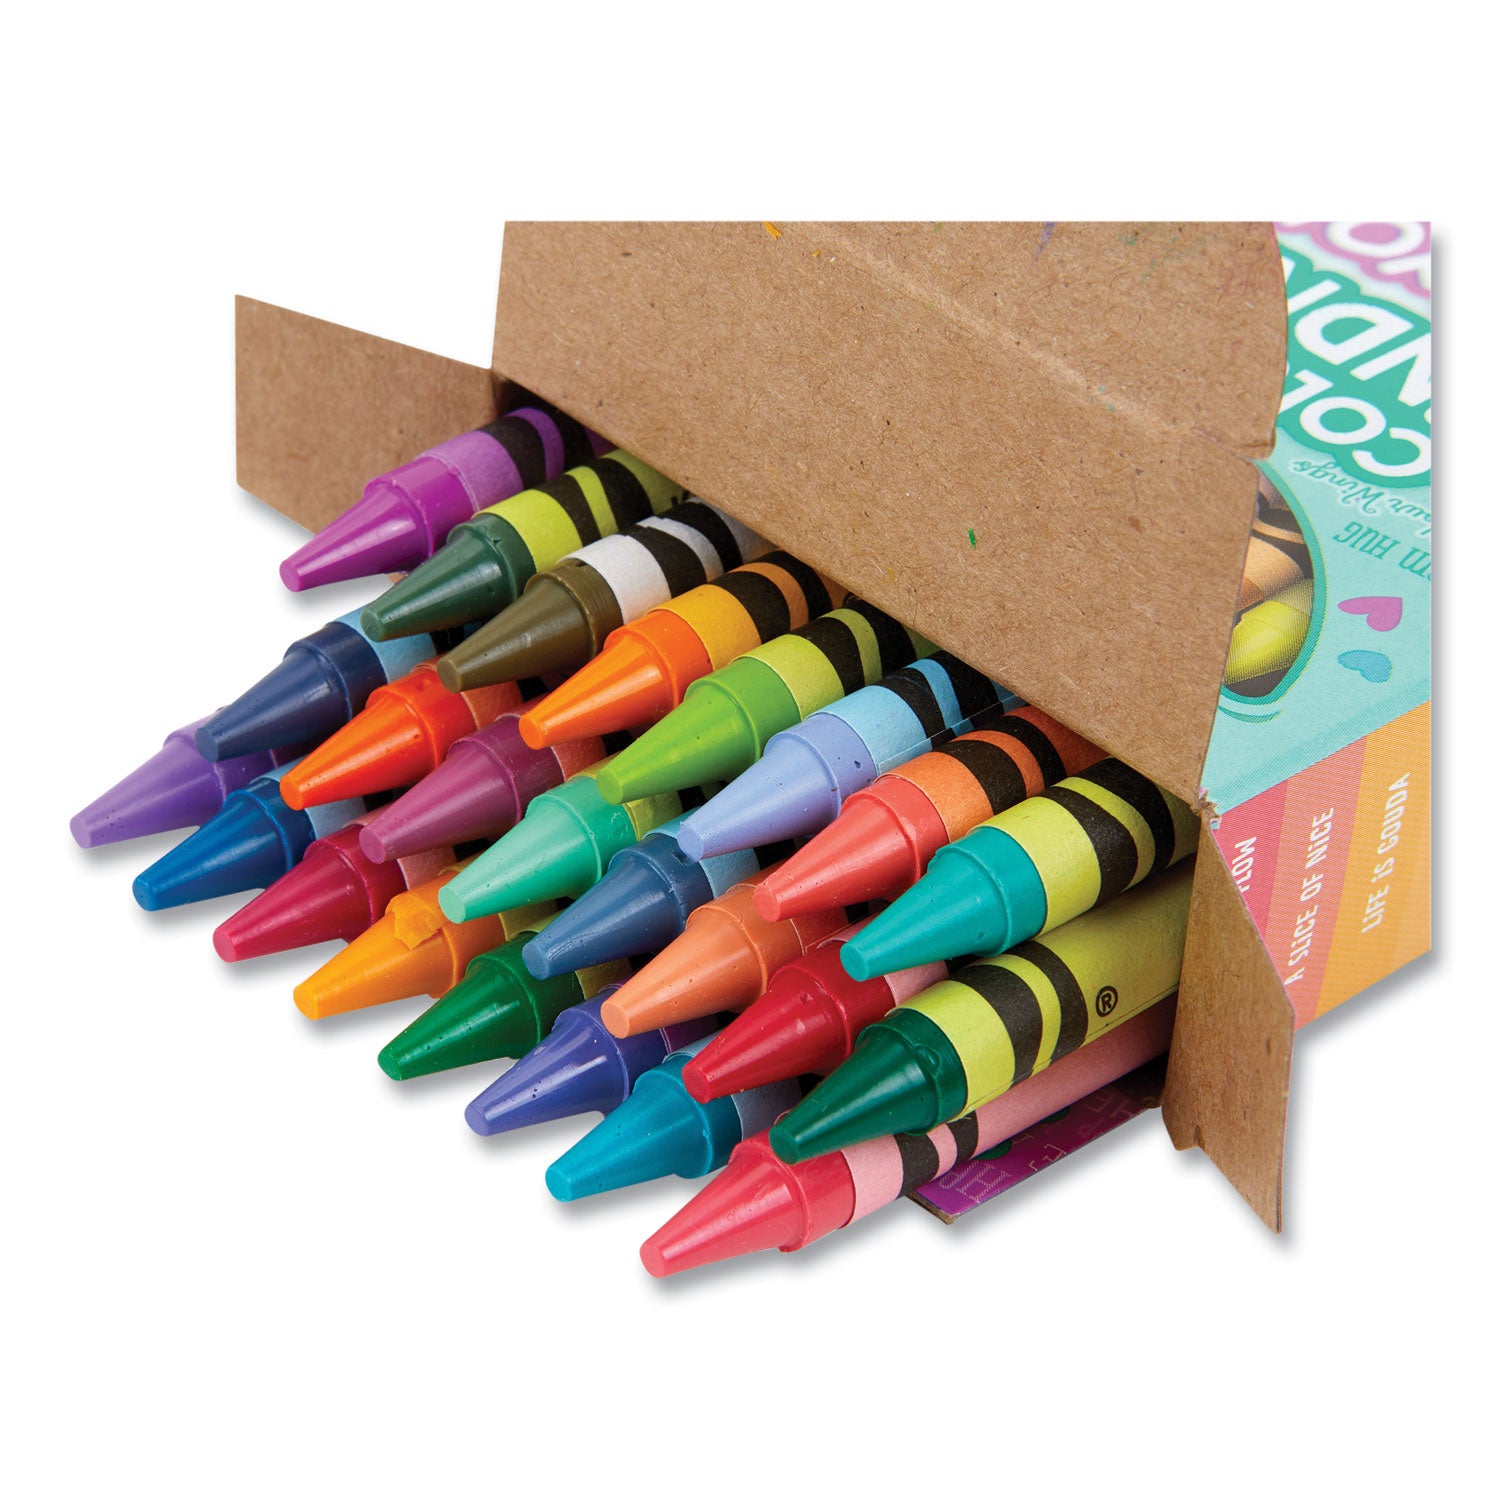 colors-of-kindness-crayons-assorted-24-pack_cyo520130 - 6